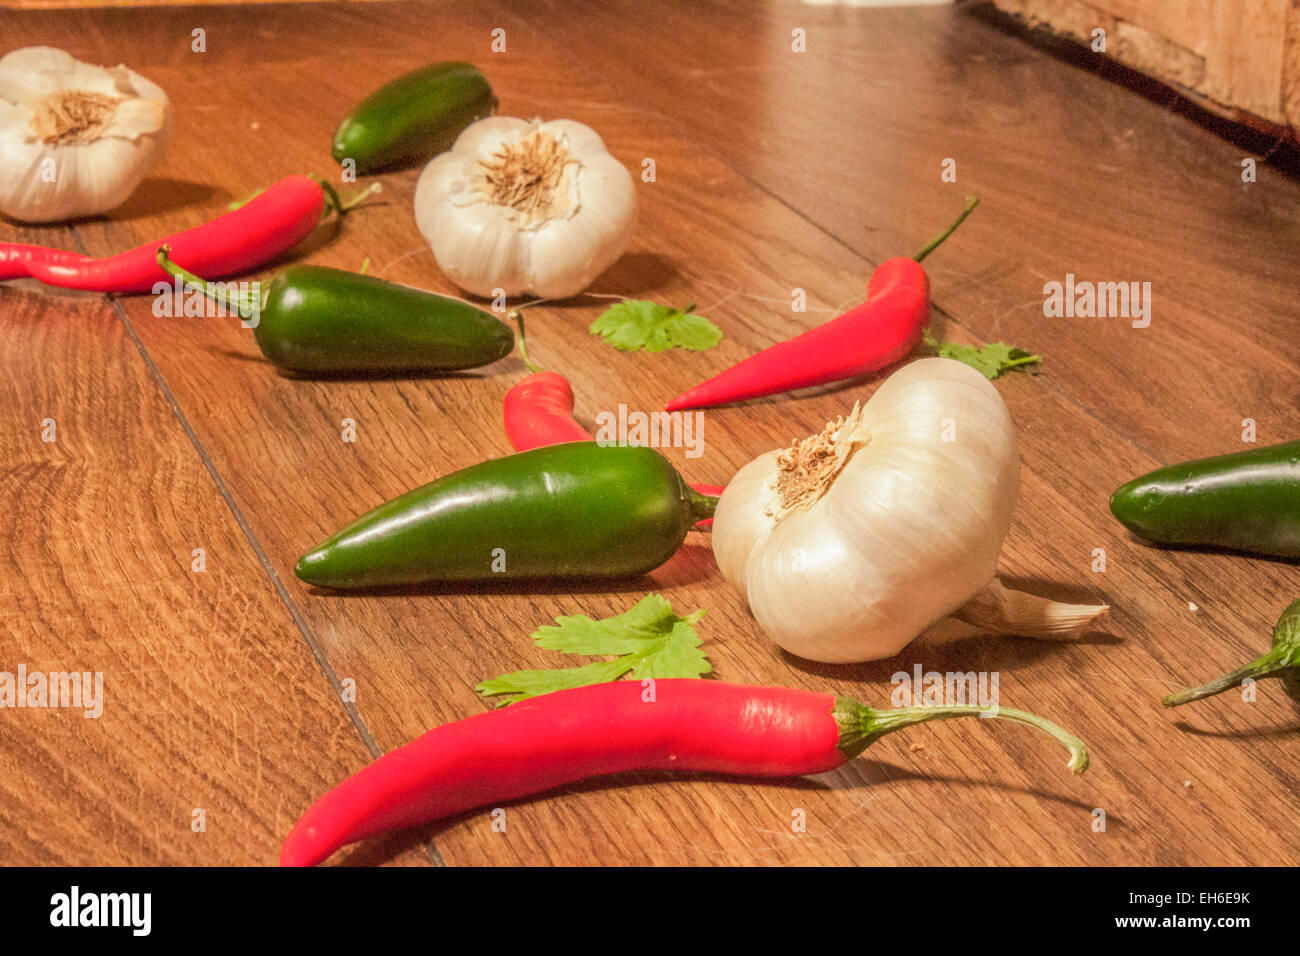 Garlic between jalapenos and chili peppers, on wooden ground Stock Photo